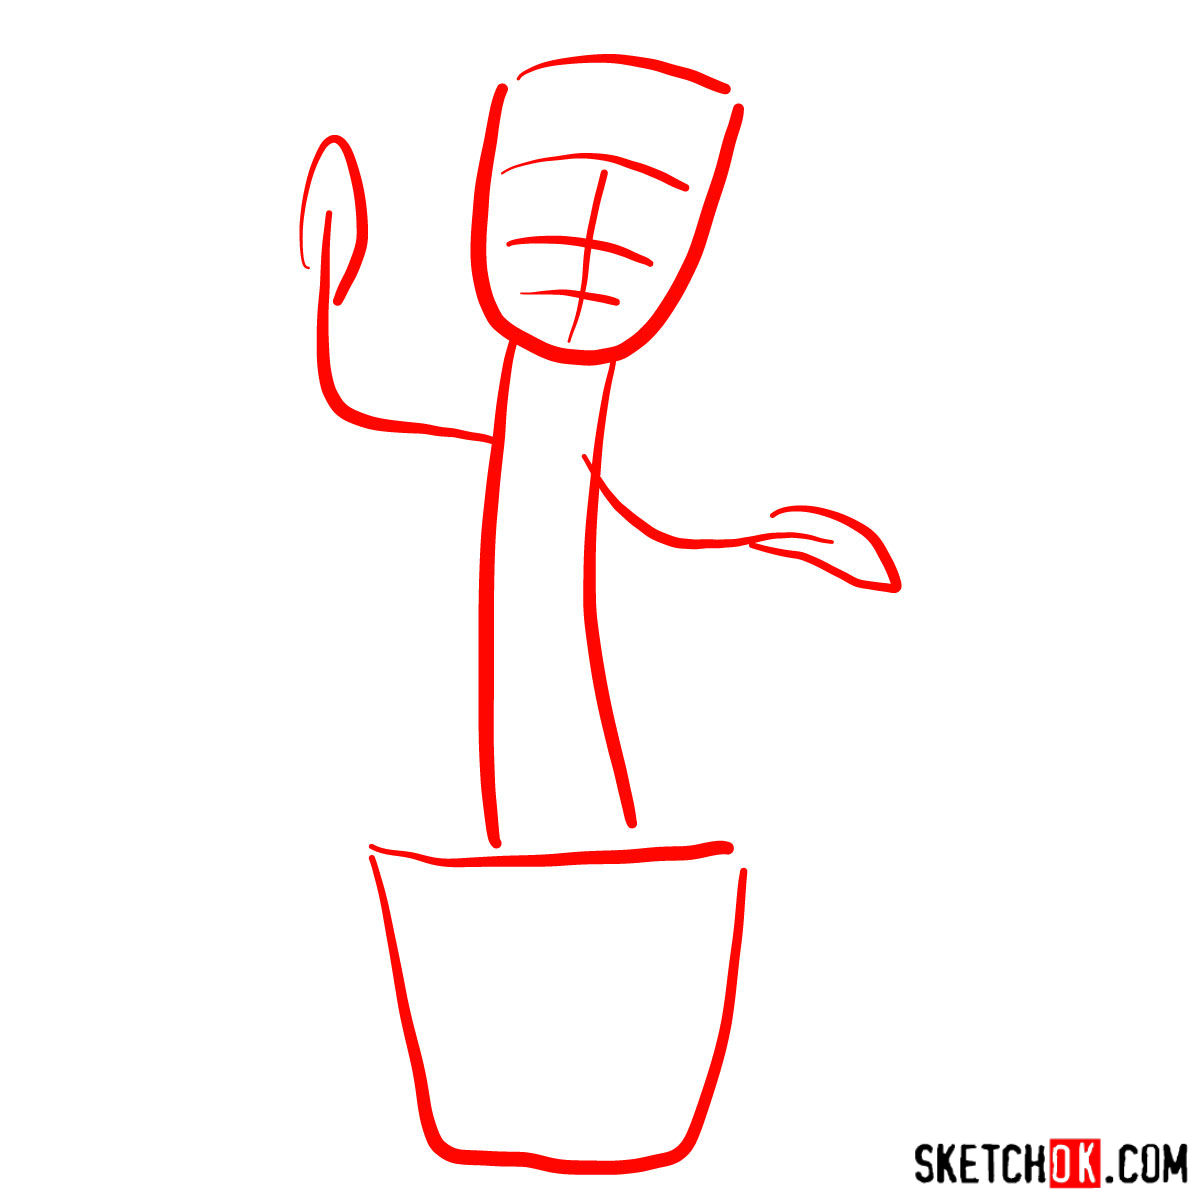 Baby Groot in a pot - step by step drawing tutorial - step 01